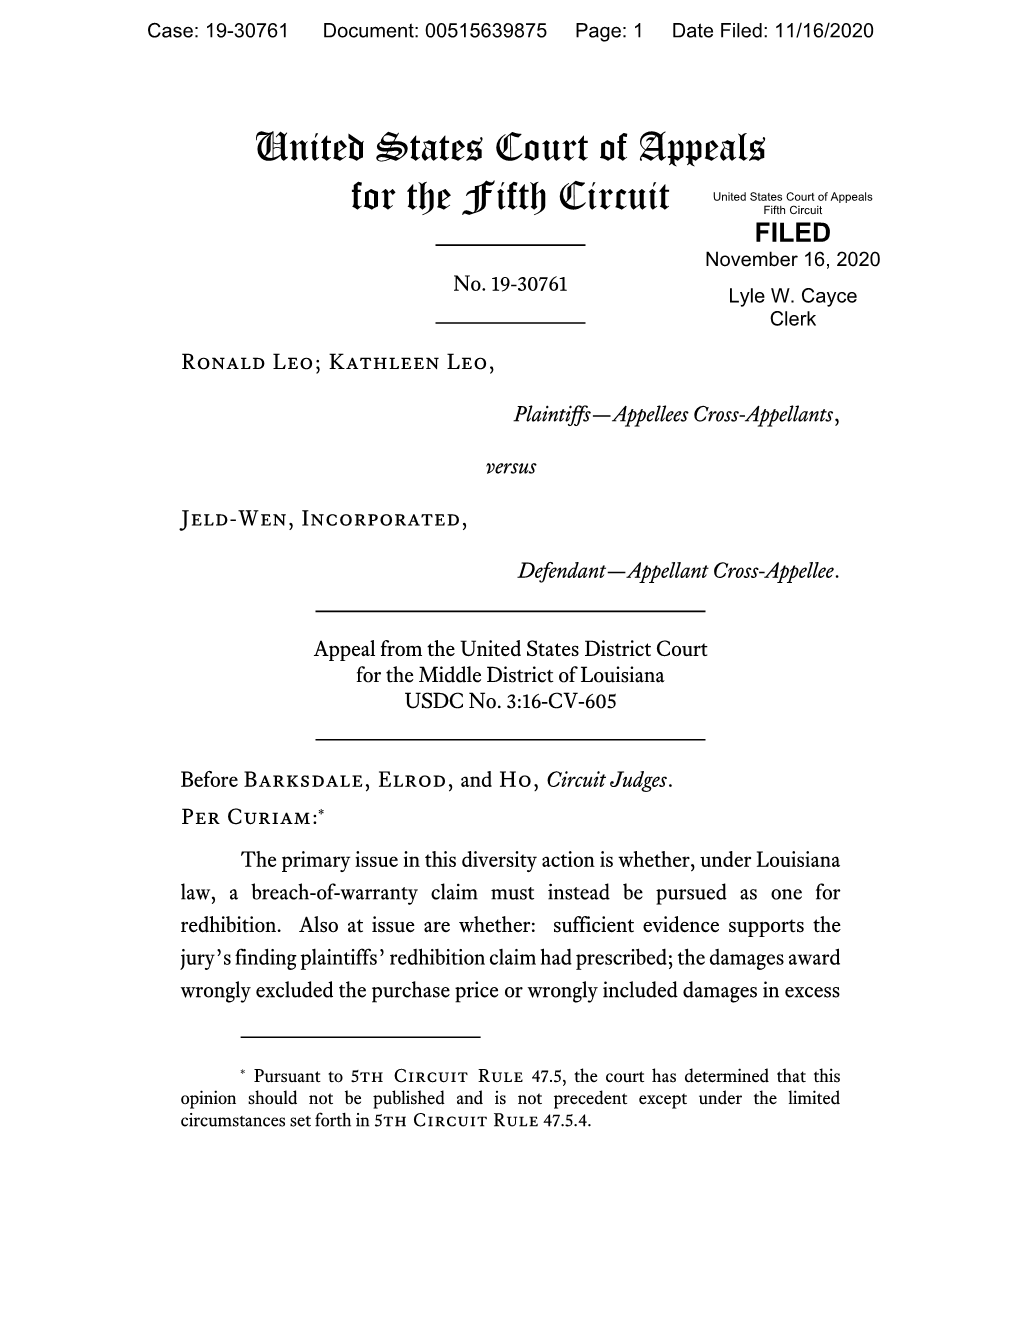 United States Court of Appeals for the Fifth Circuit Fifth Circuit FILED November 16, 2020 No